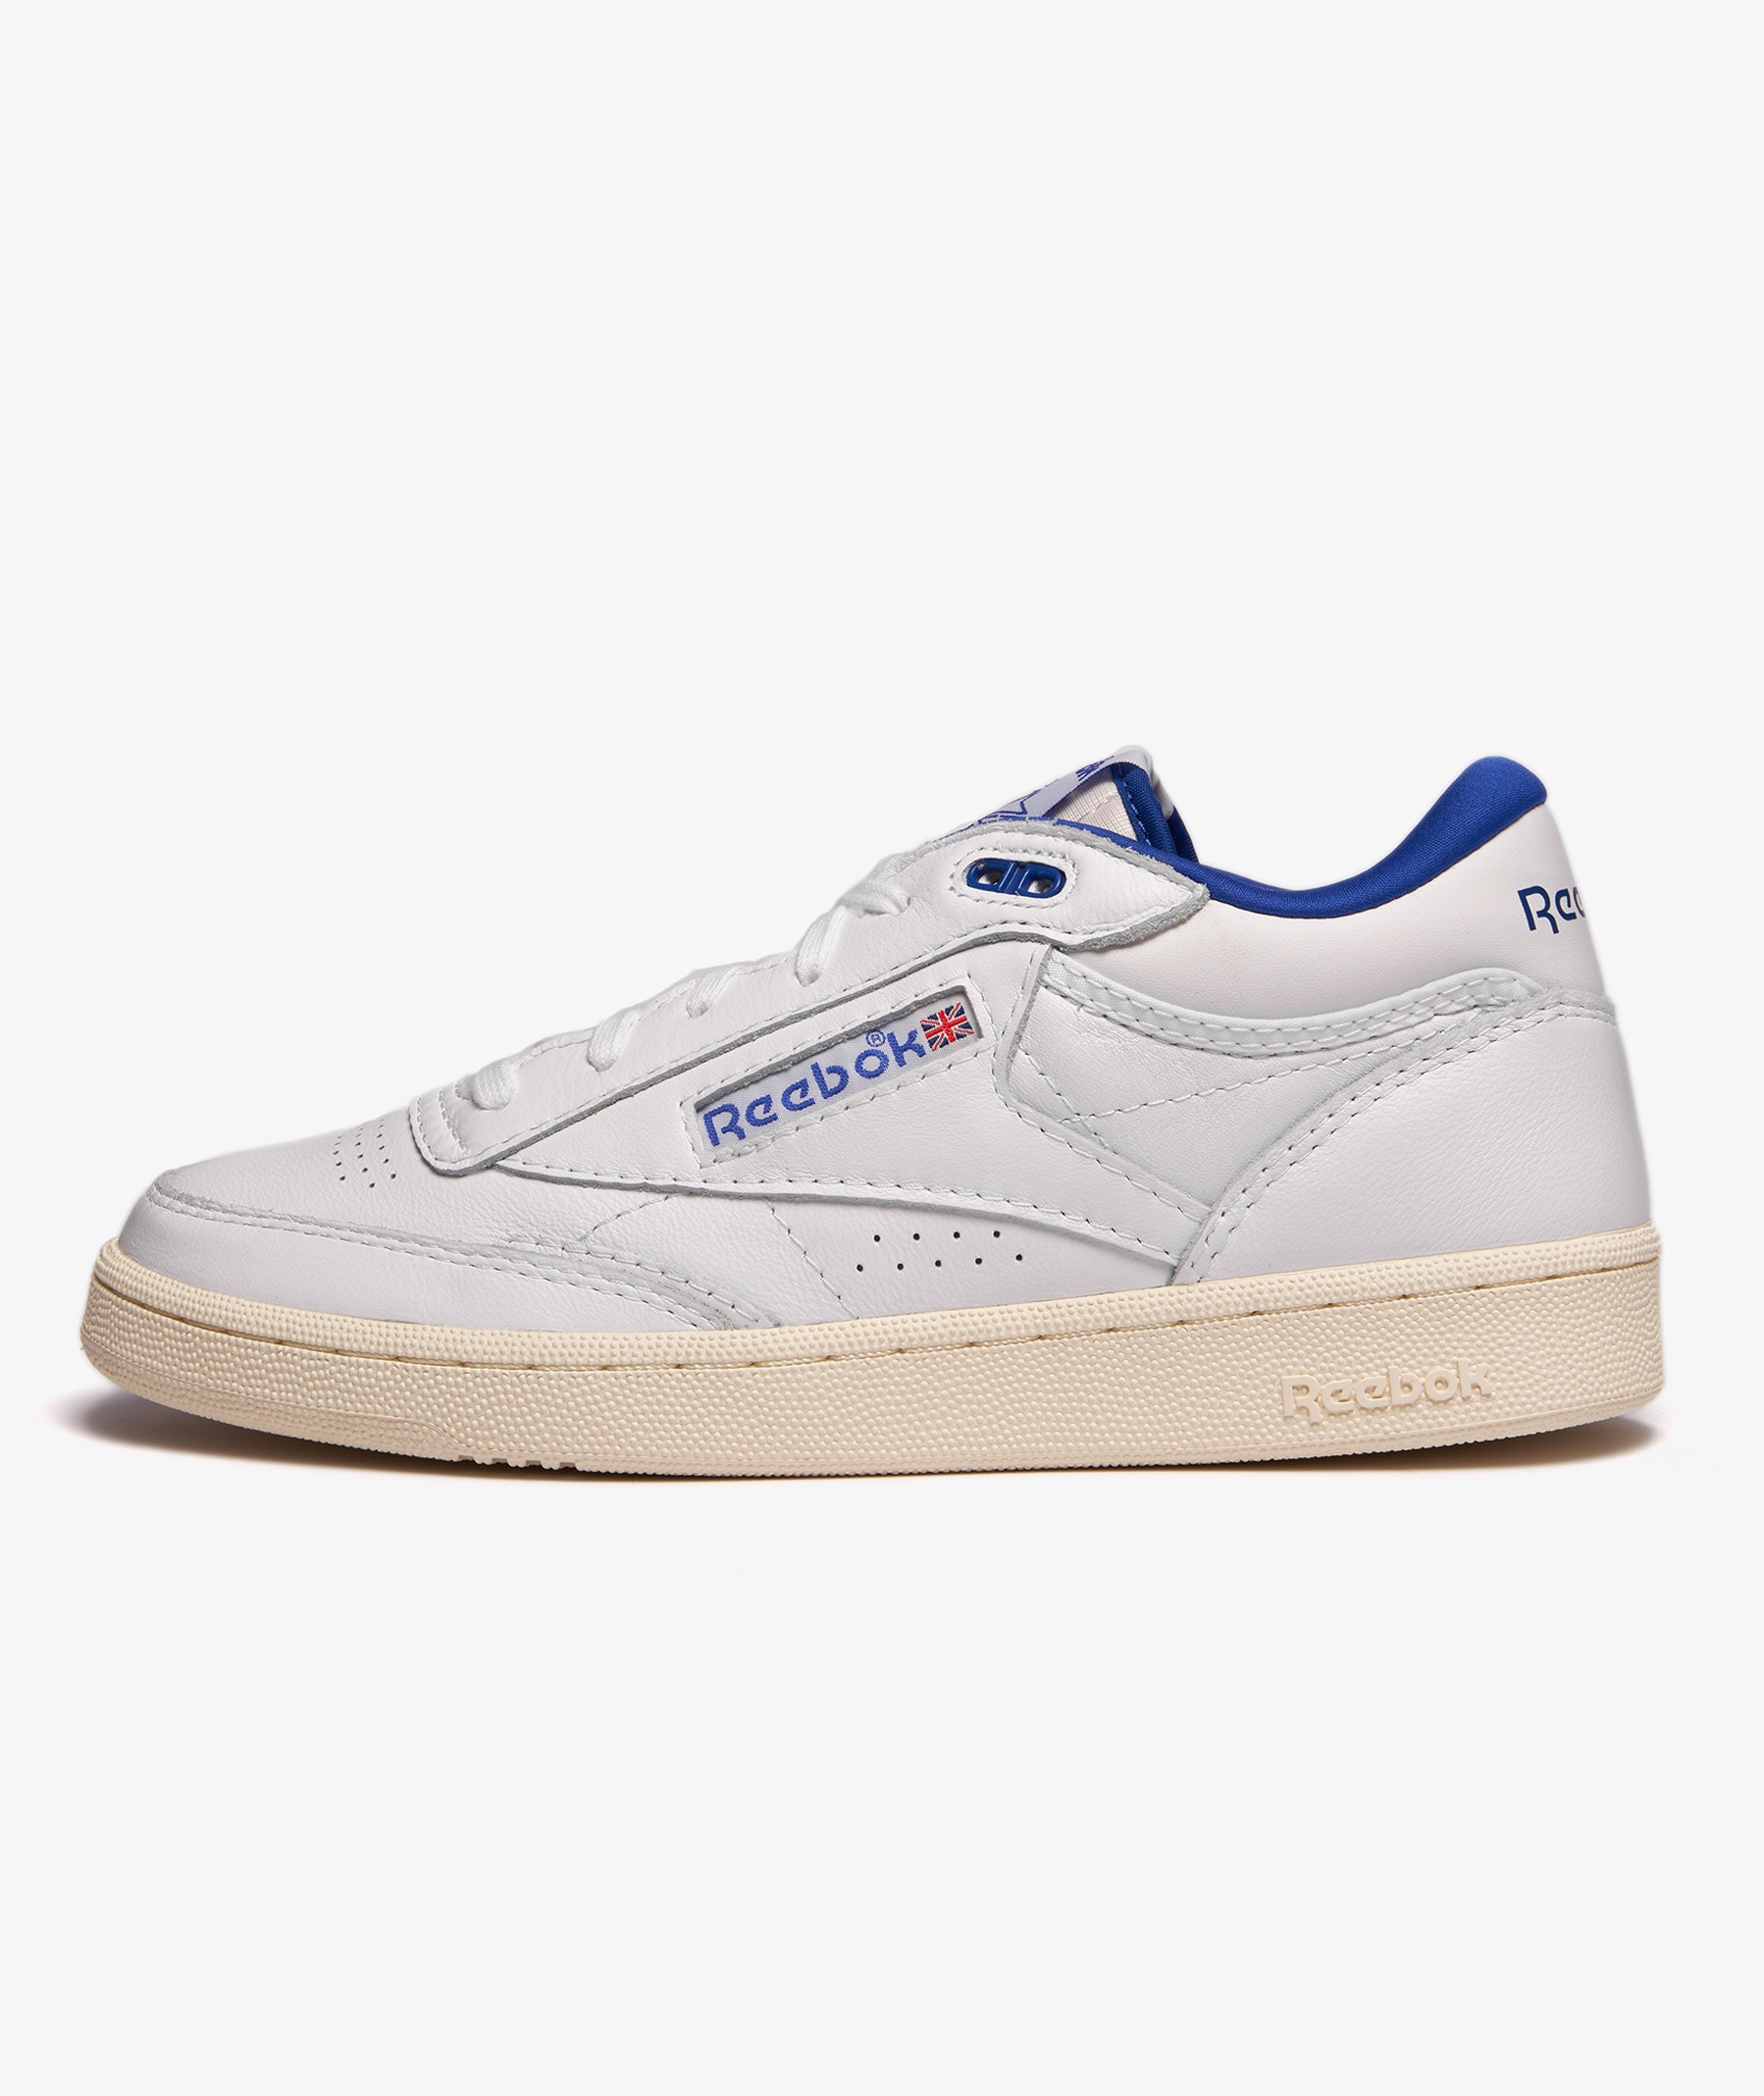 The latest and hottest Clearance Reebok Club Mid II Vintage discount 64%